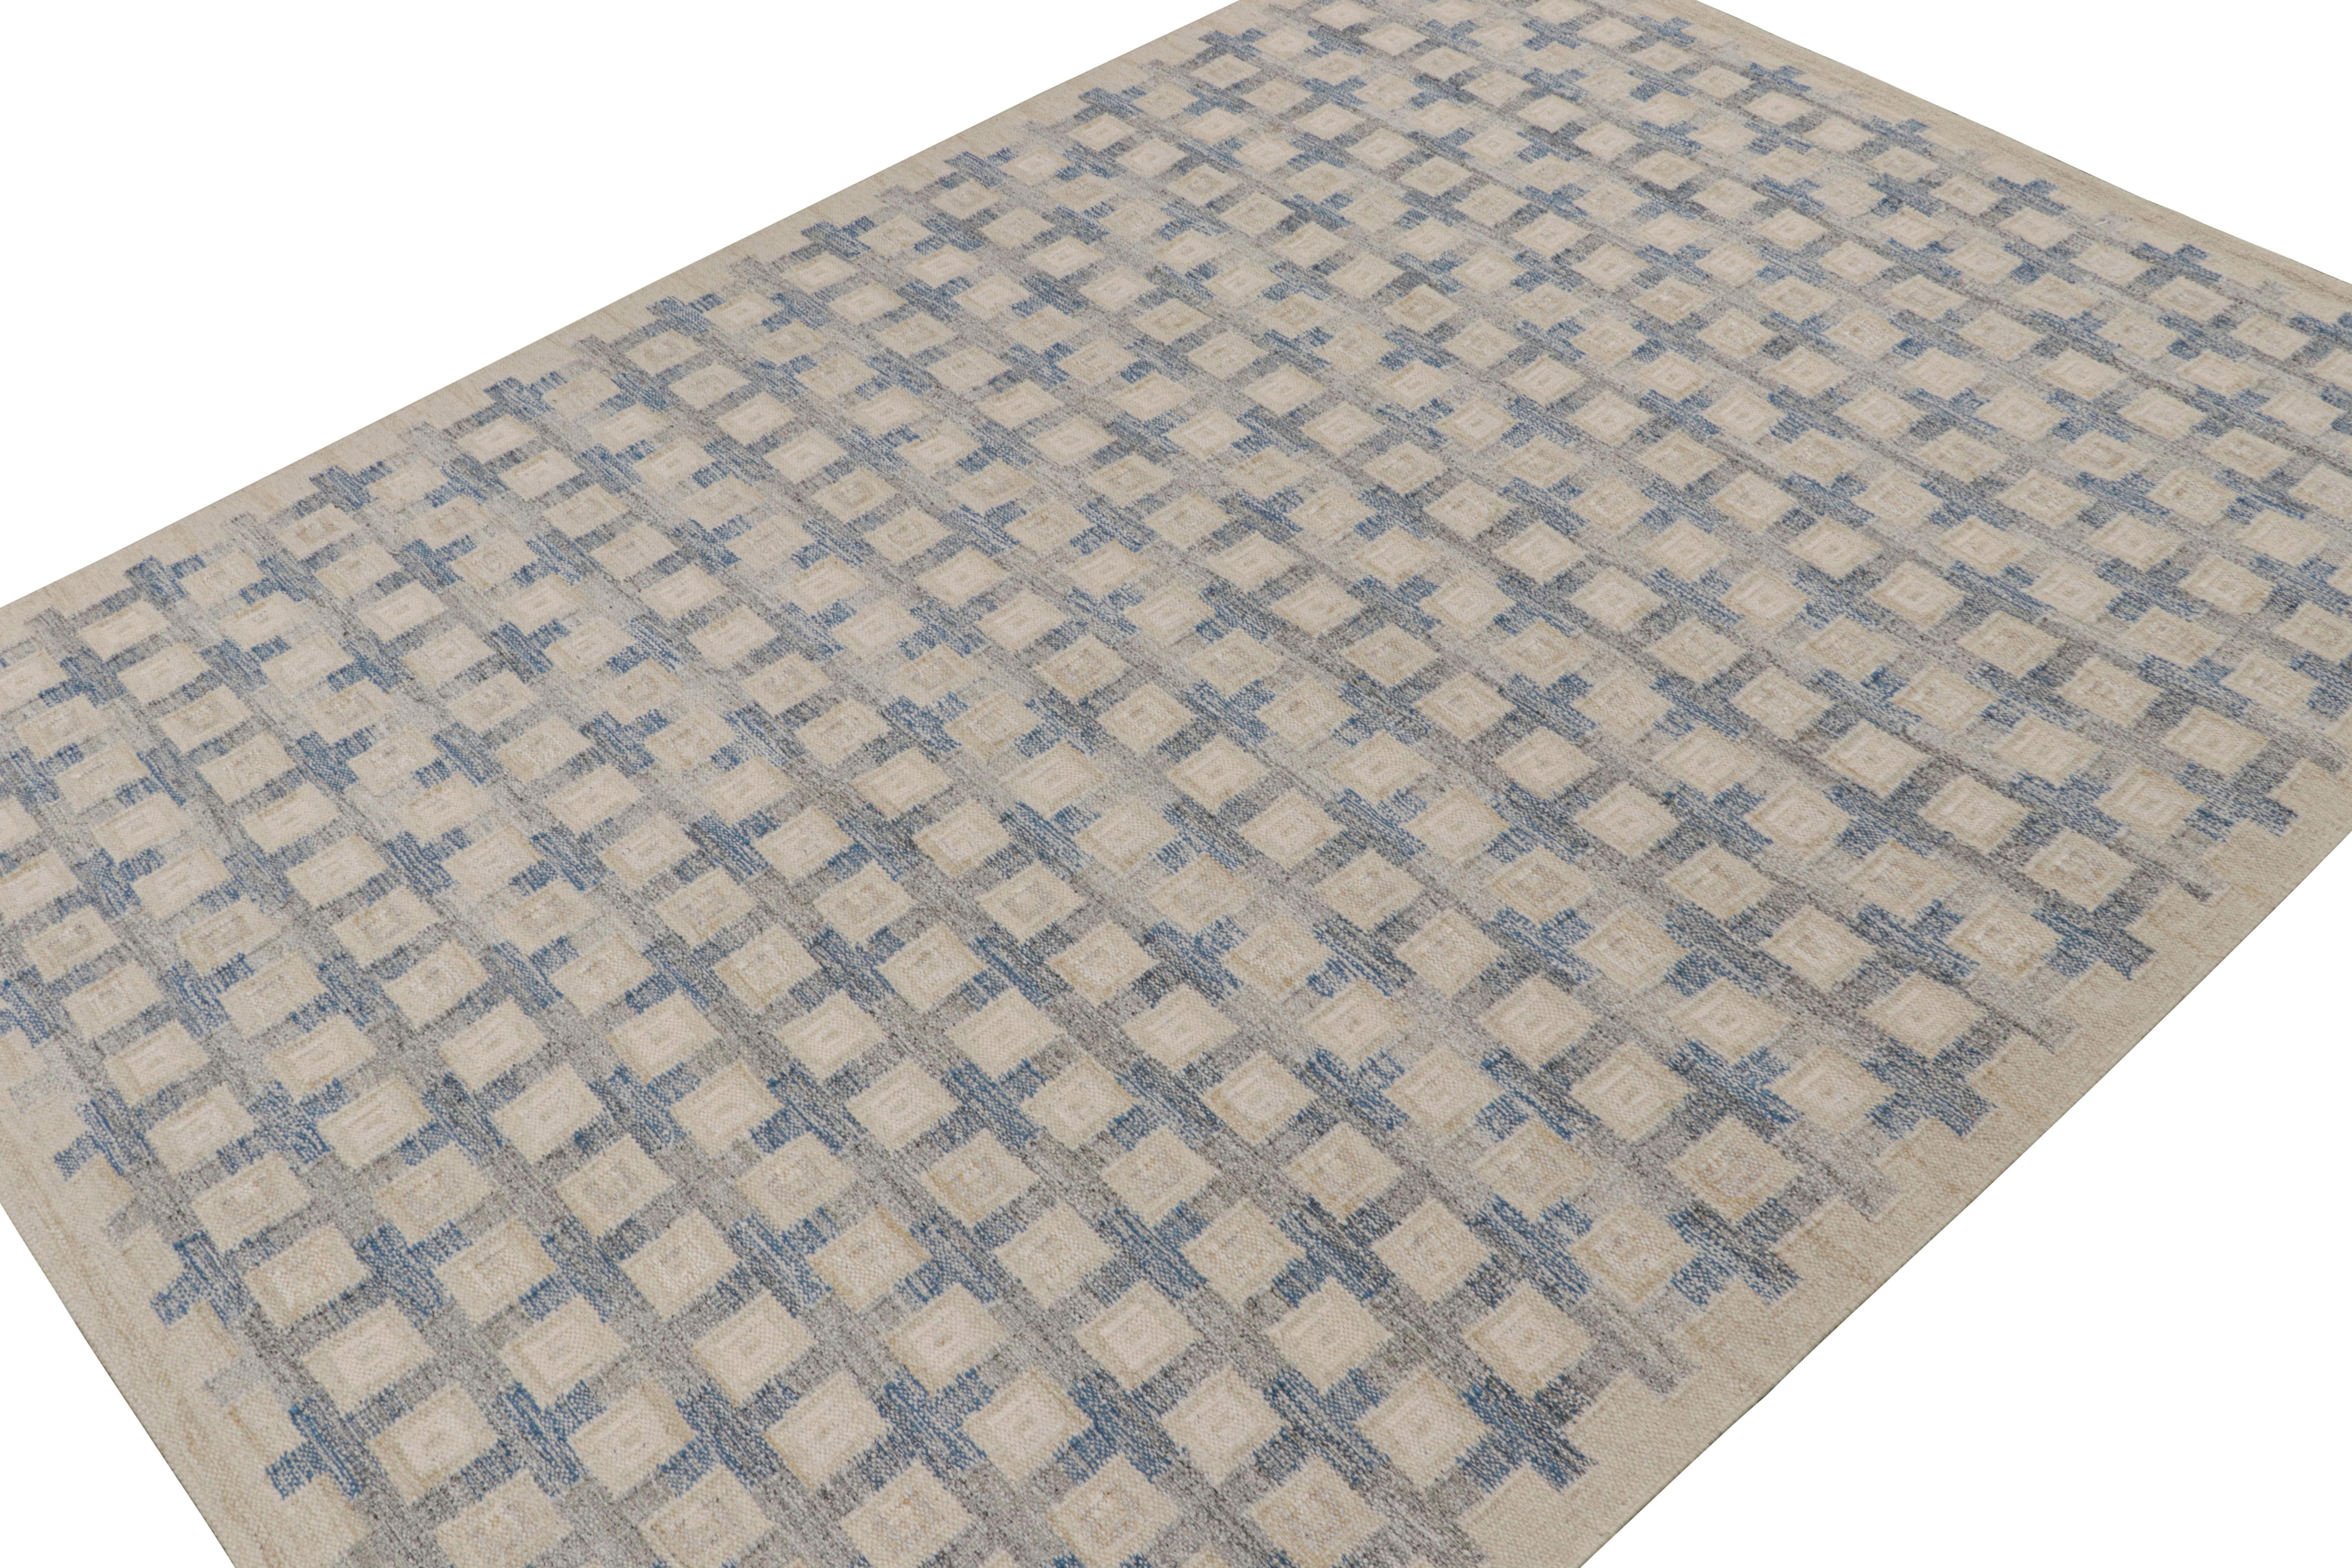 A smart 10x14 Swedish style kilim from our award-winning Scandinavian flat weave collection. Handwoven in wool, cotton & undyed natural yarns.

On the Design: 

This rug enjoys geometric patterns in blue, black & beige. Keen eyes will admire undyed,